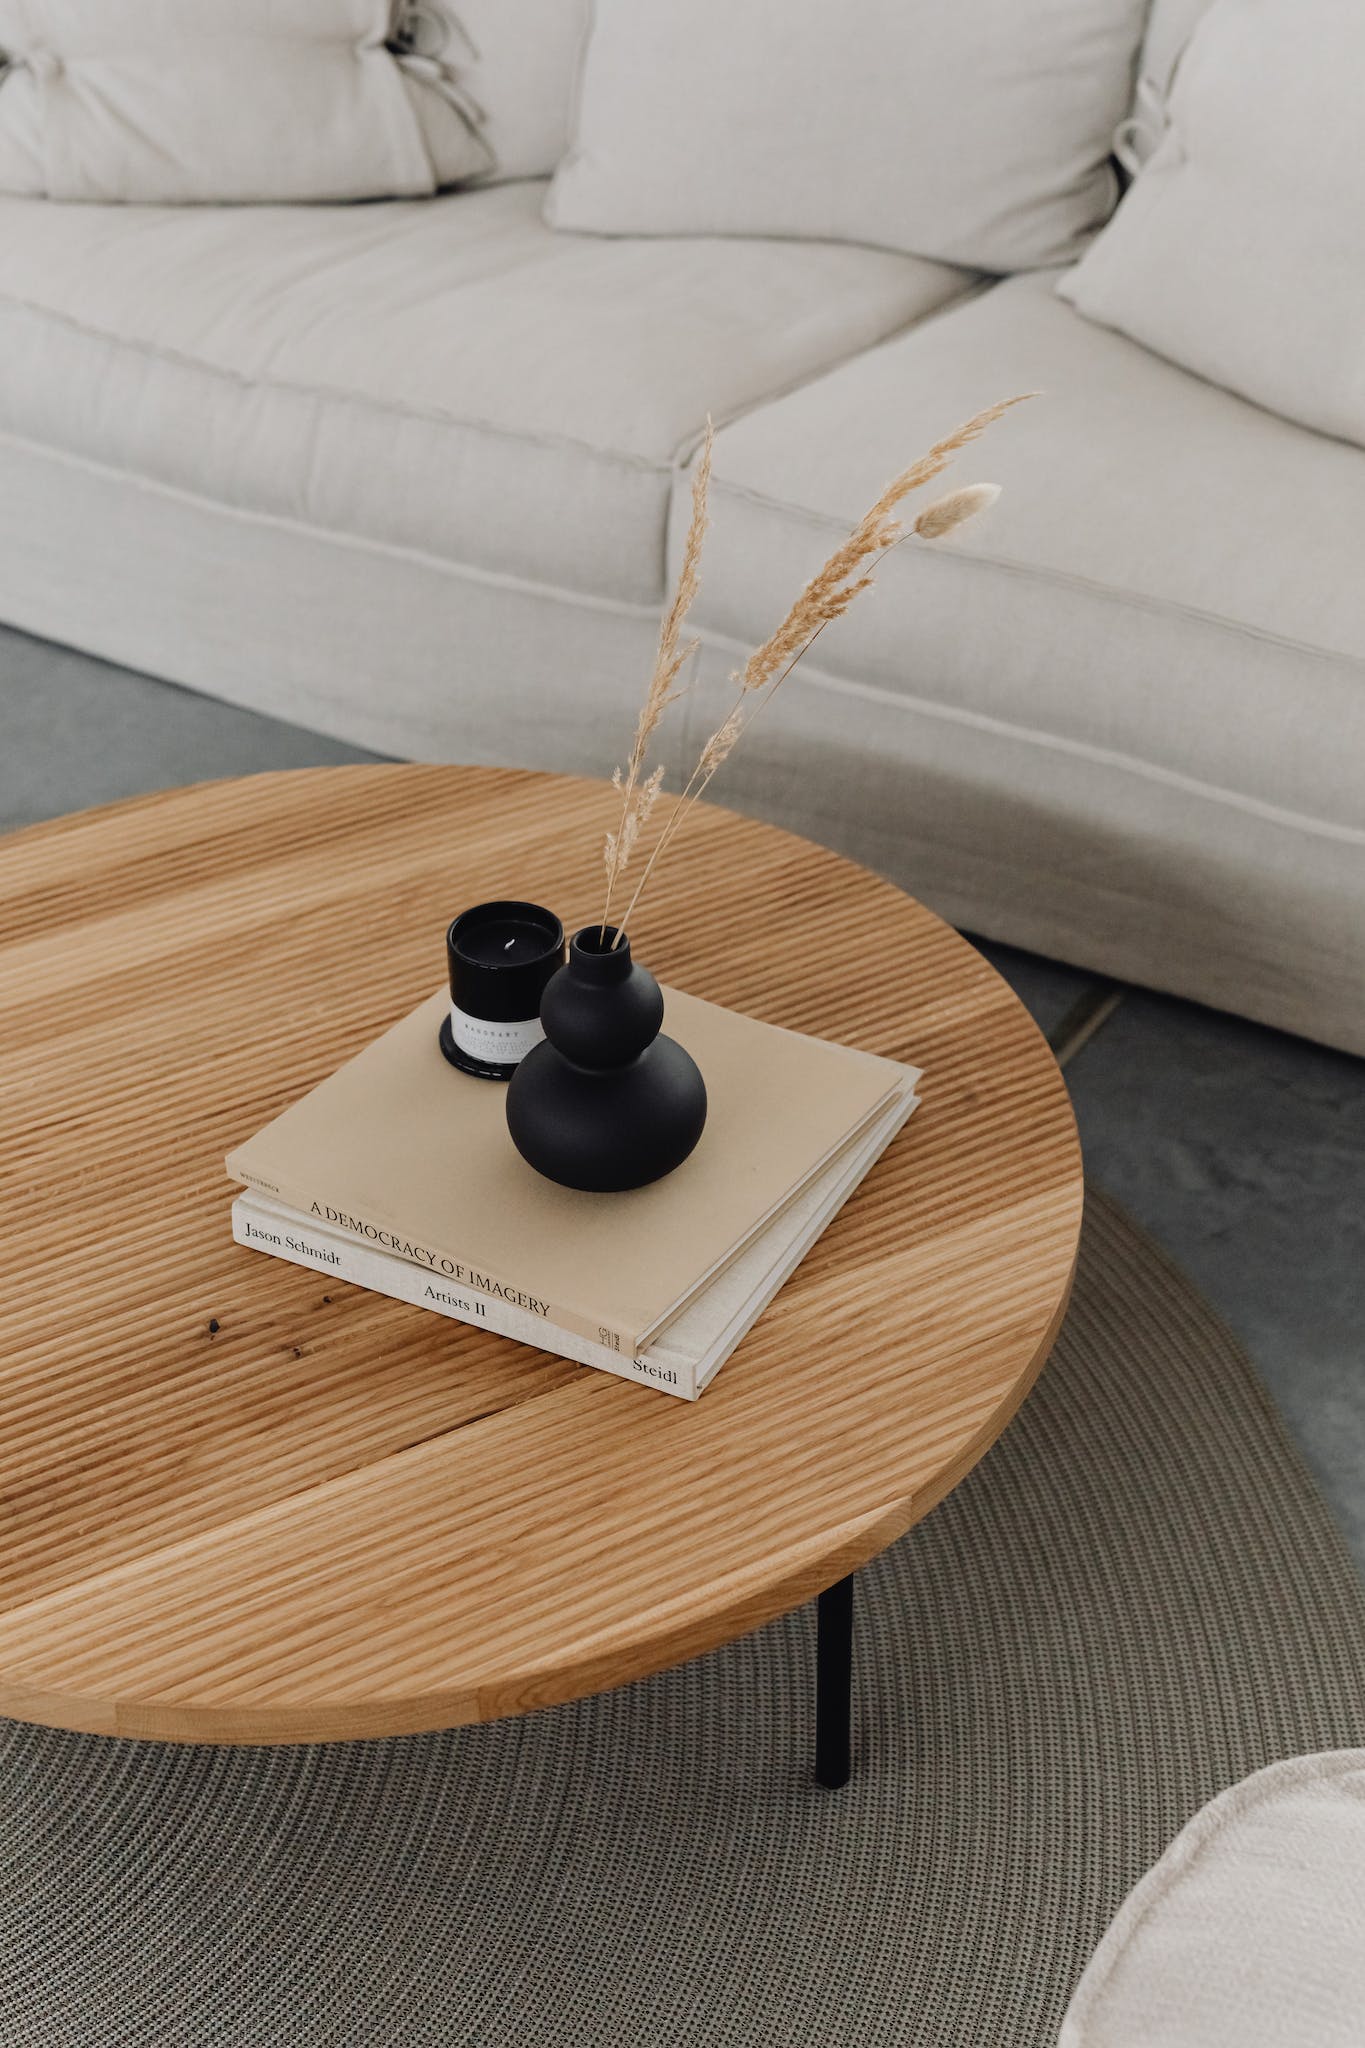 7 Stunning Items to Elevate Your Coffee Table Decor